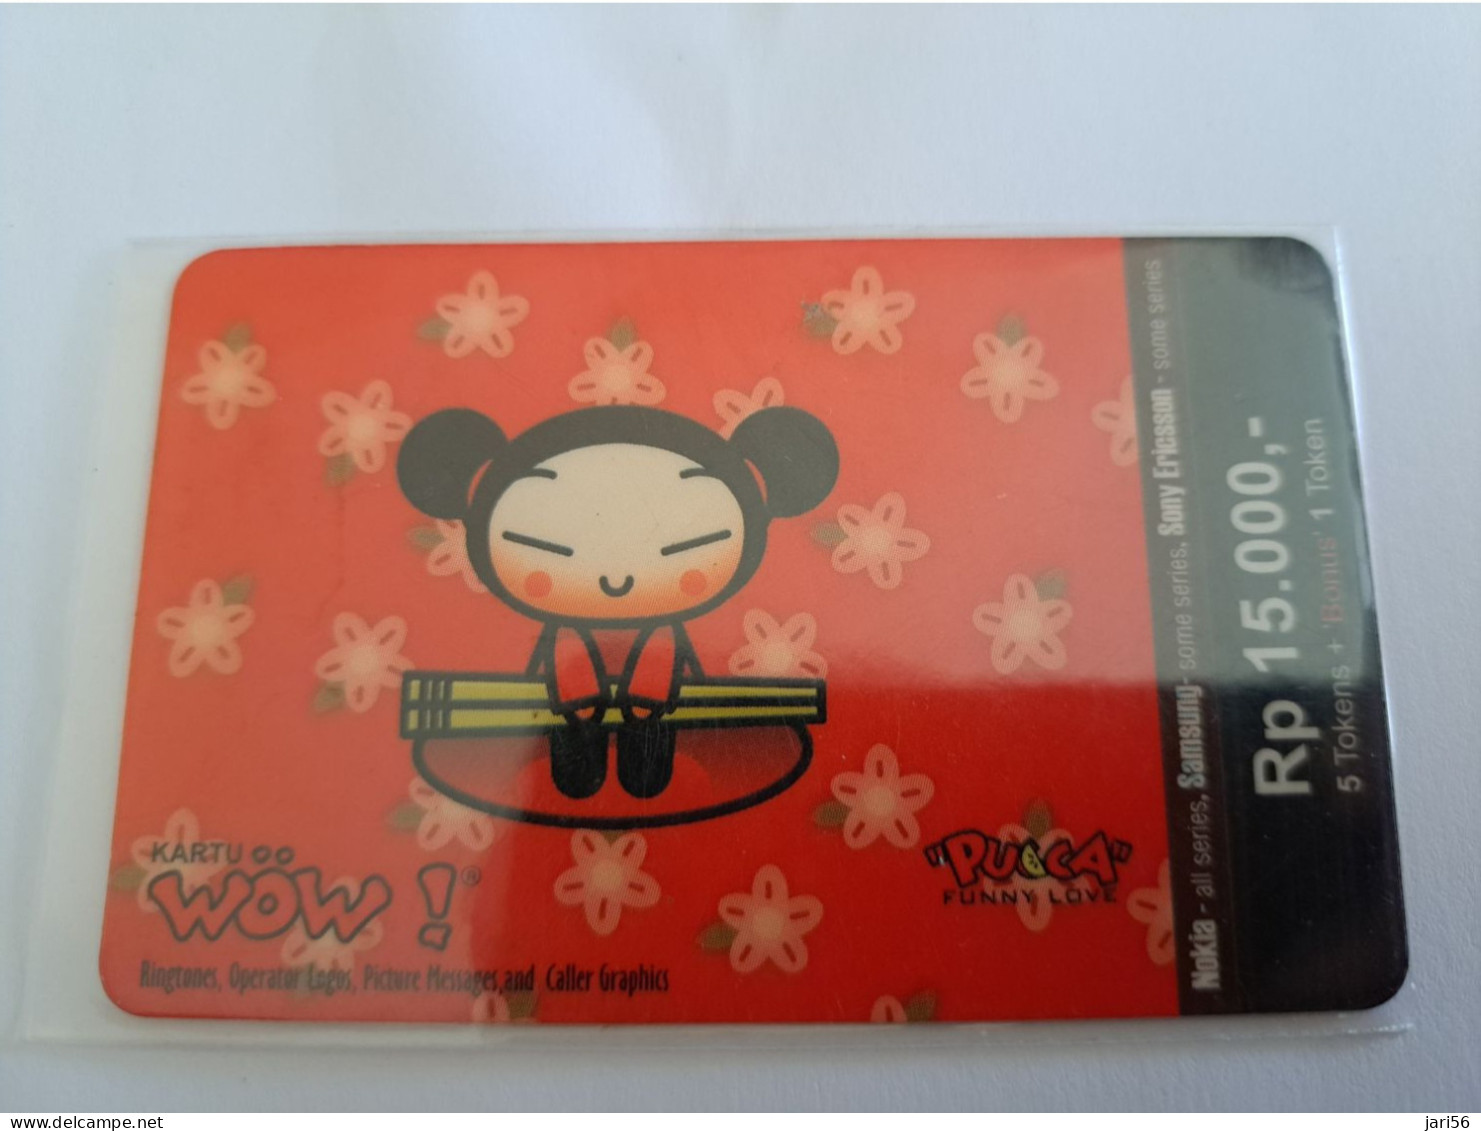 INDONESIA  / INDOCARD/ PUCA/ WOW/STRIP / INDOSAT / RP 15.000 / PREPAID/     / USED CARD  **13812 ** - Indonesia